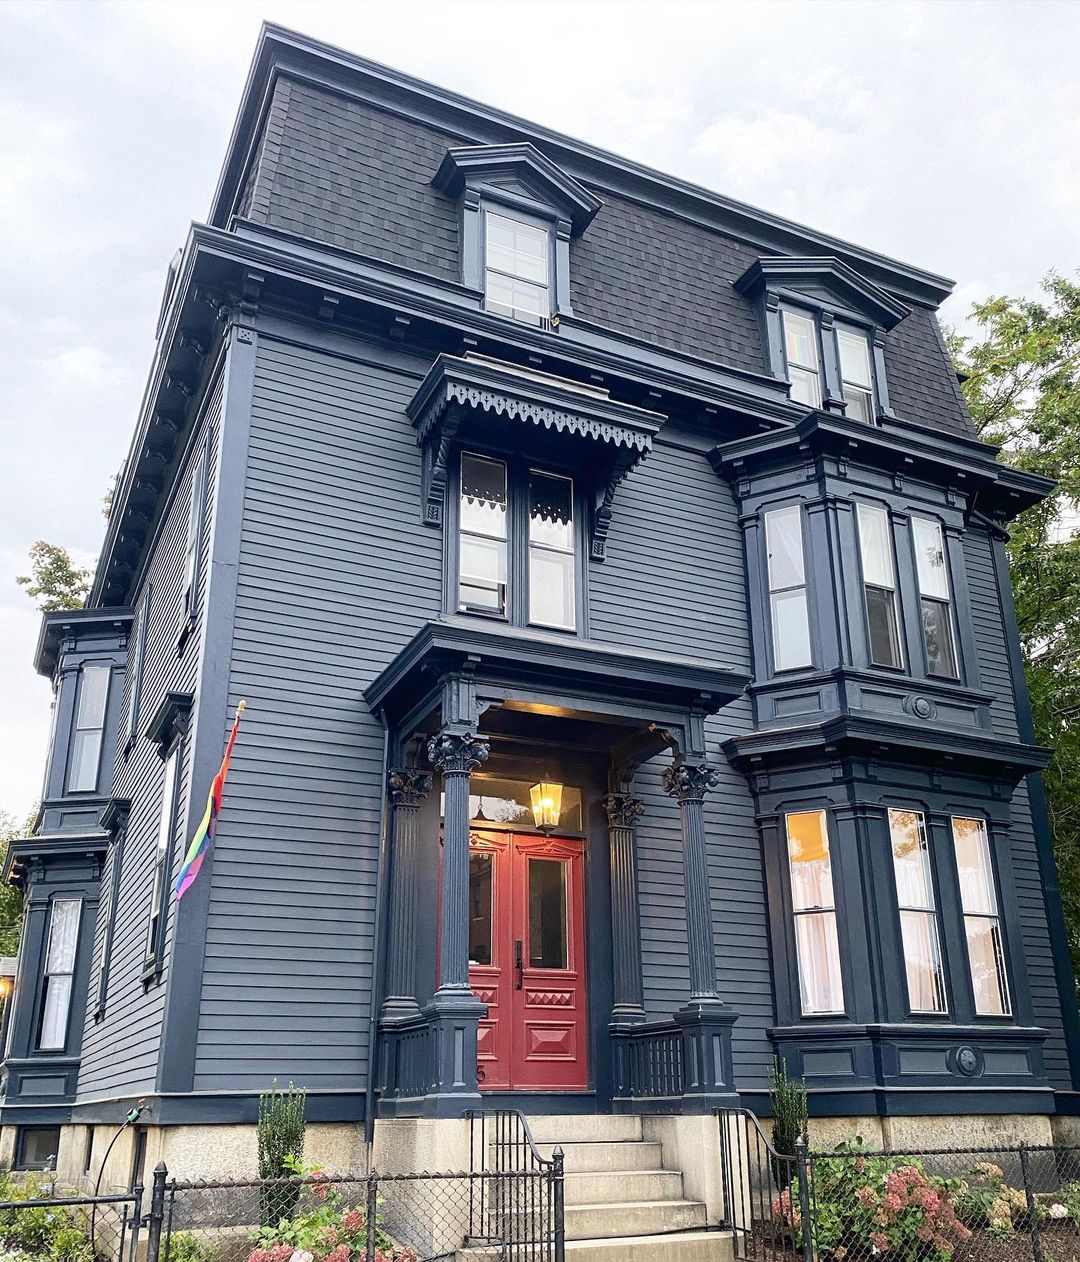 Historic Home that was Renovated into New Apartments in Federal Hill. Photo by Instagram user @mcvickerdg